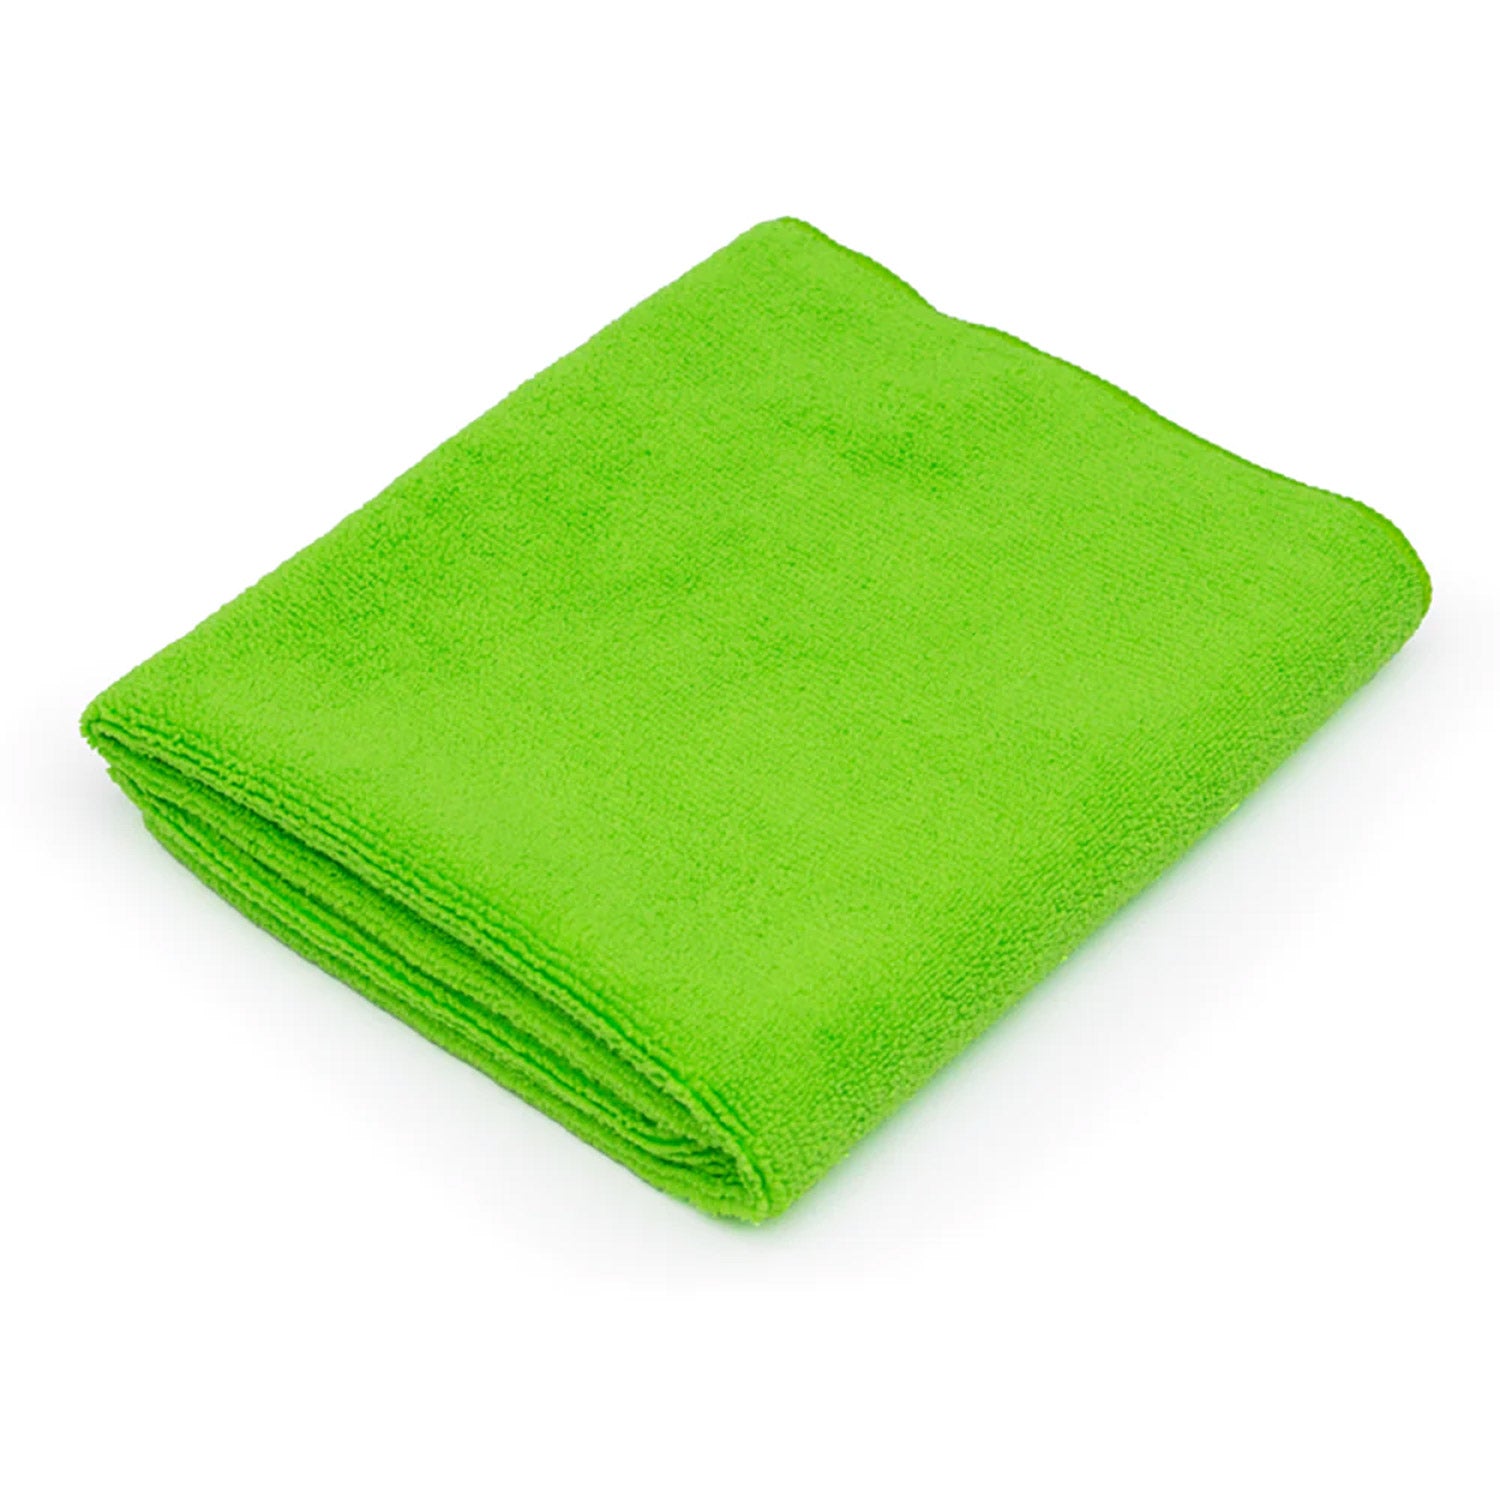 lime-green-large-terry-car-wash-towel